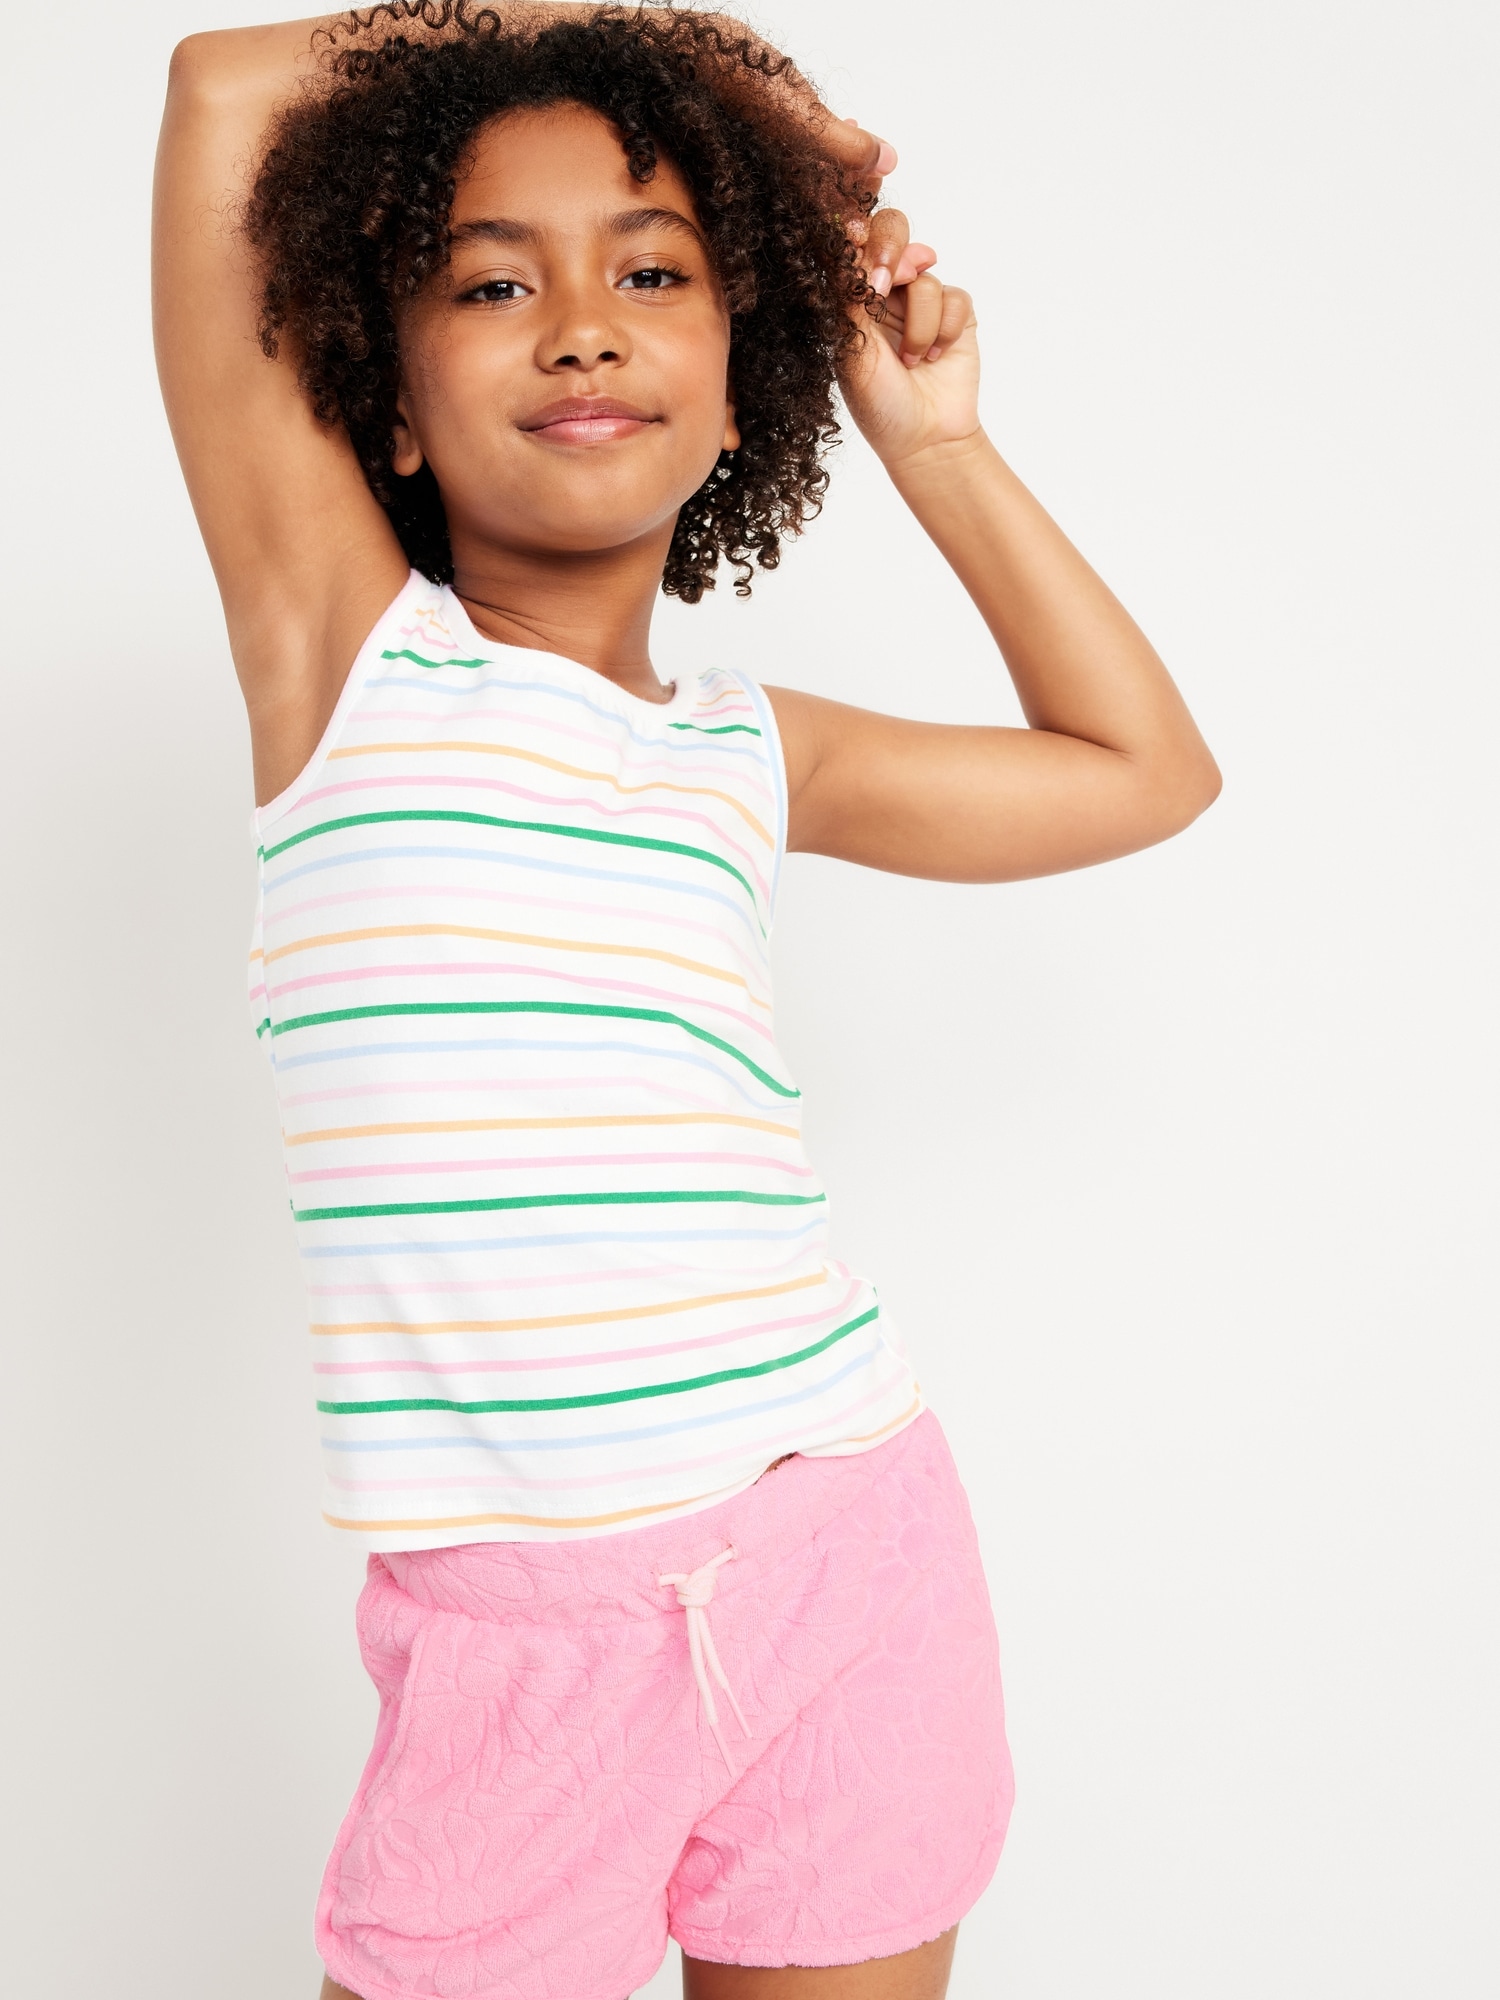 Floral Loop-Terry Dolphin-Hem Cheer Shorts for Girls